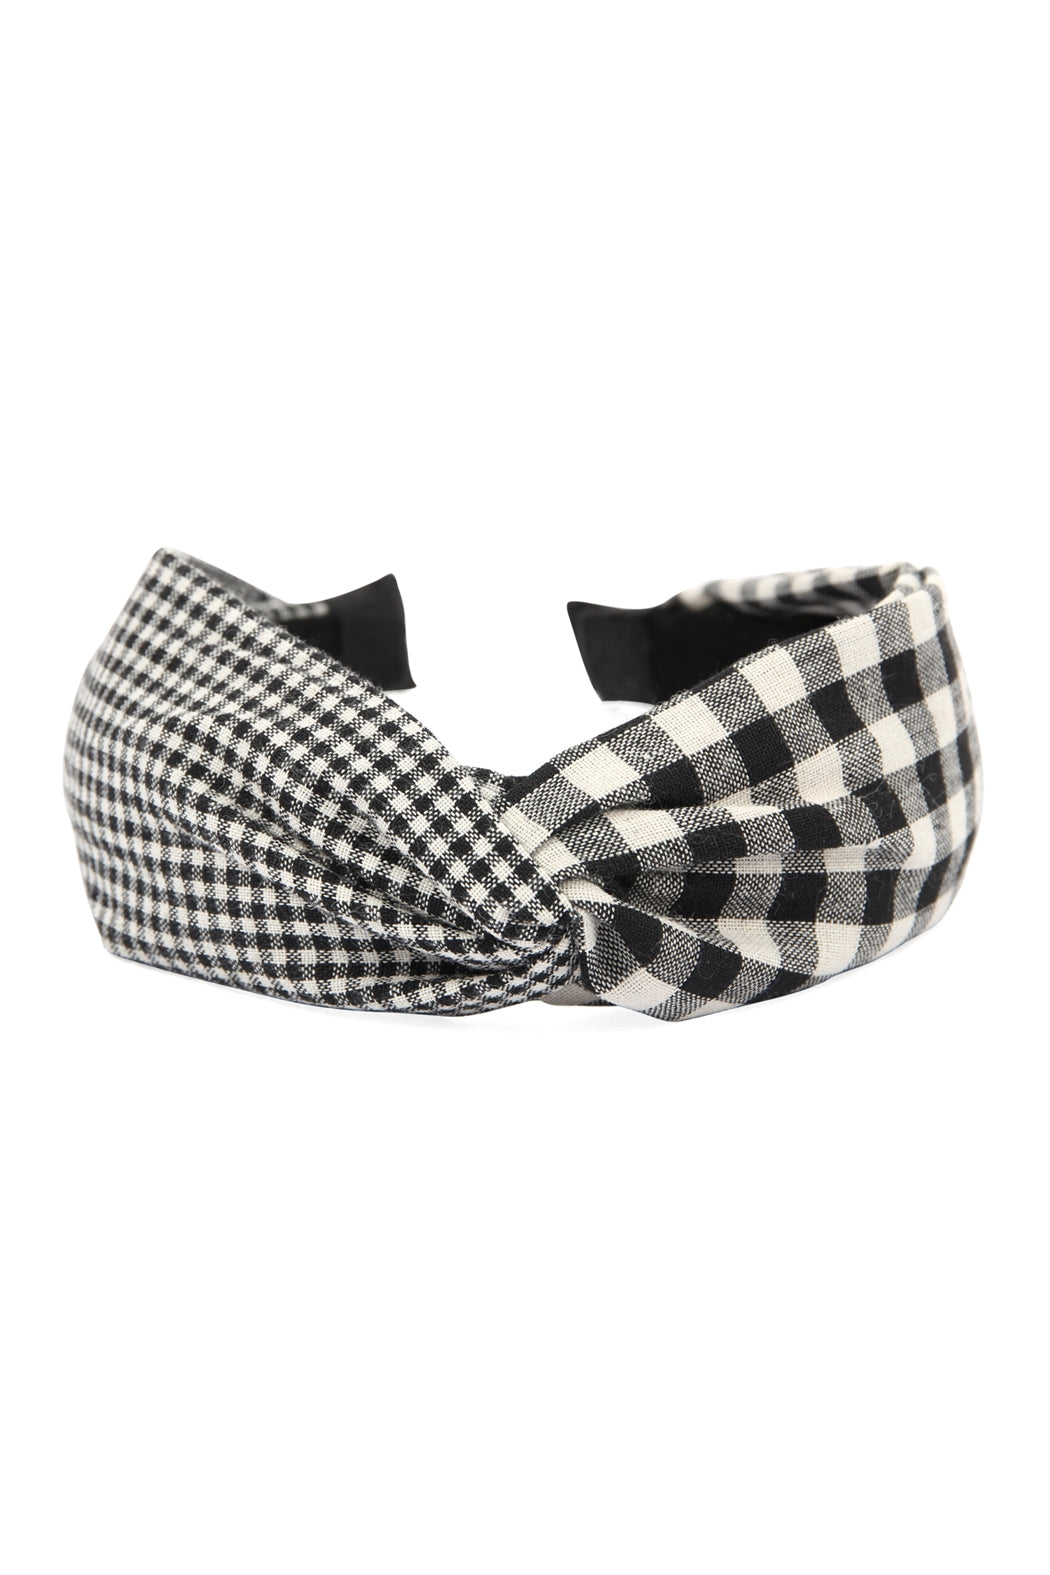 PLAID KNOTTED FABRIC COATED HAIR BAND/6PCS